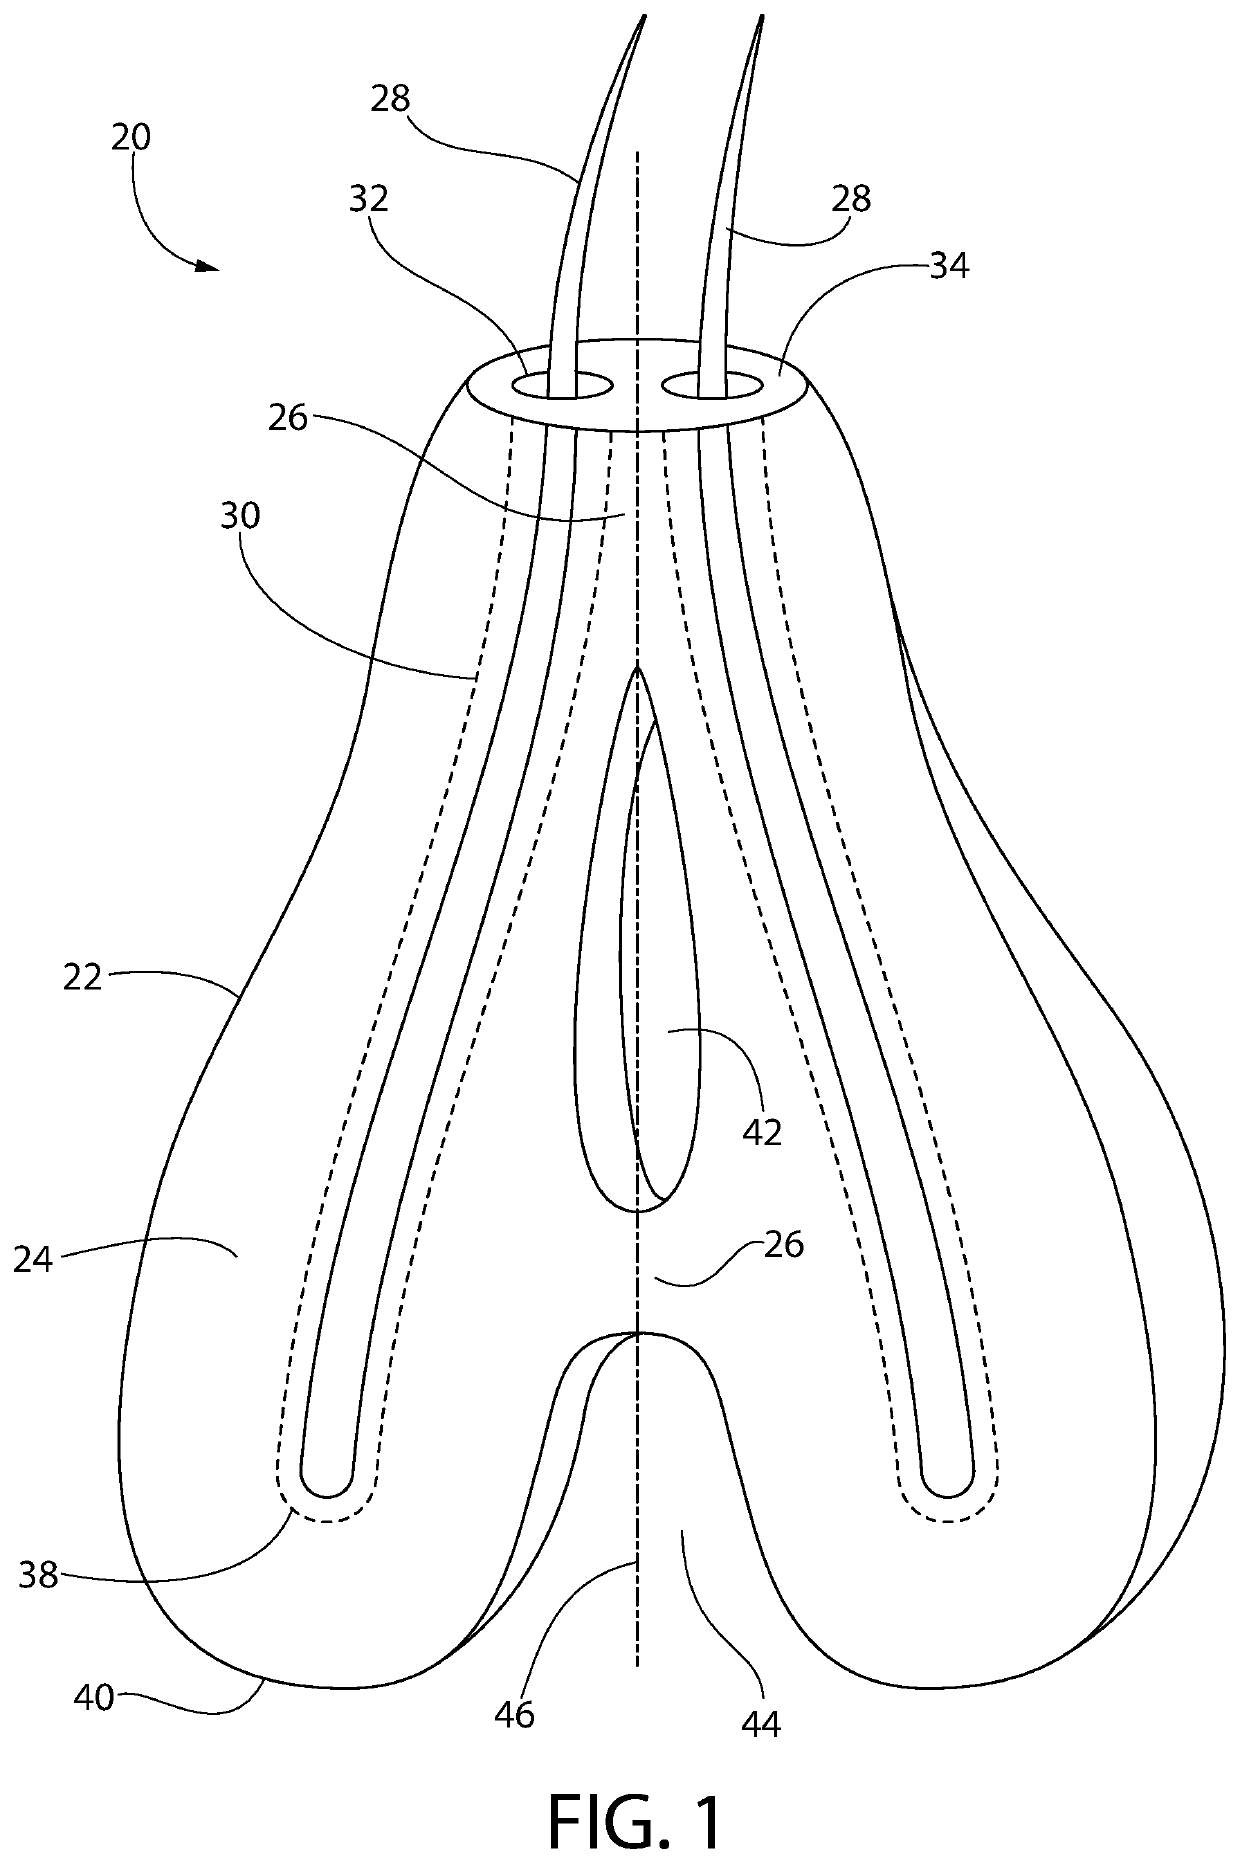 Hair implants comprising enhanced anchoring and medical safety features